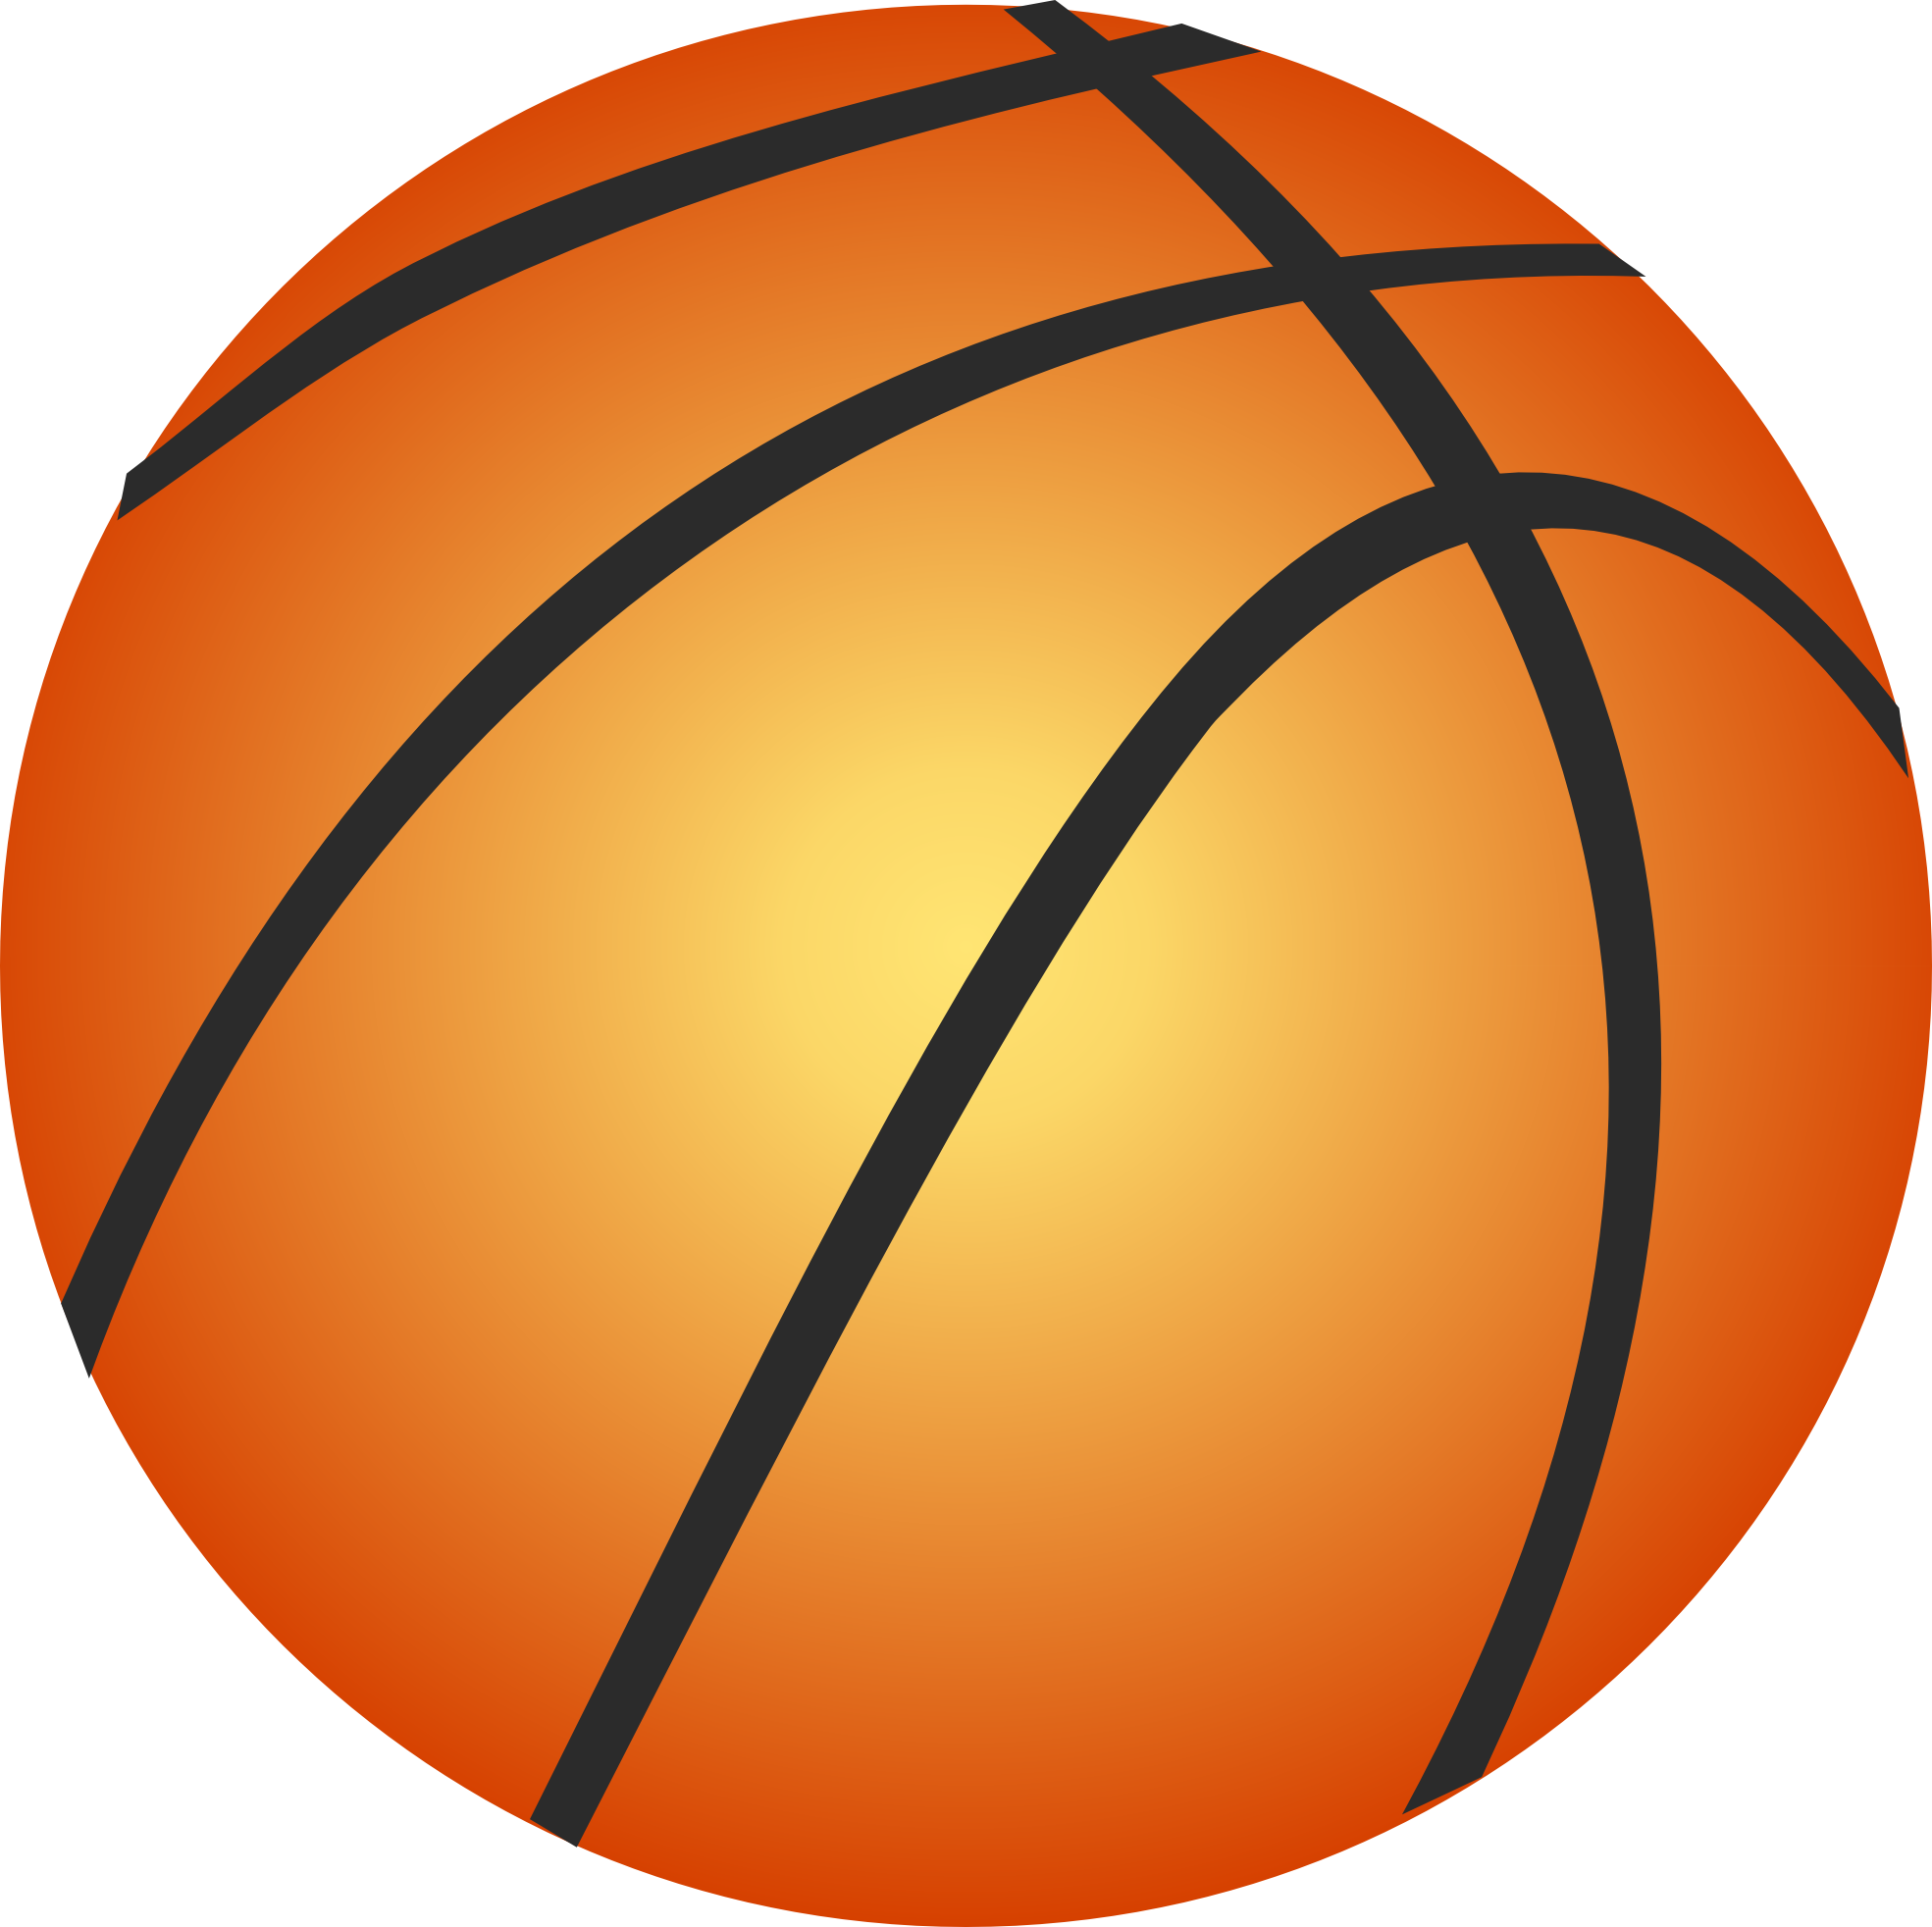 Basketball Clipart - 47 cliparts